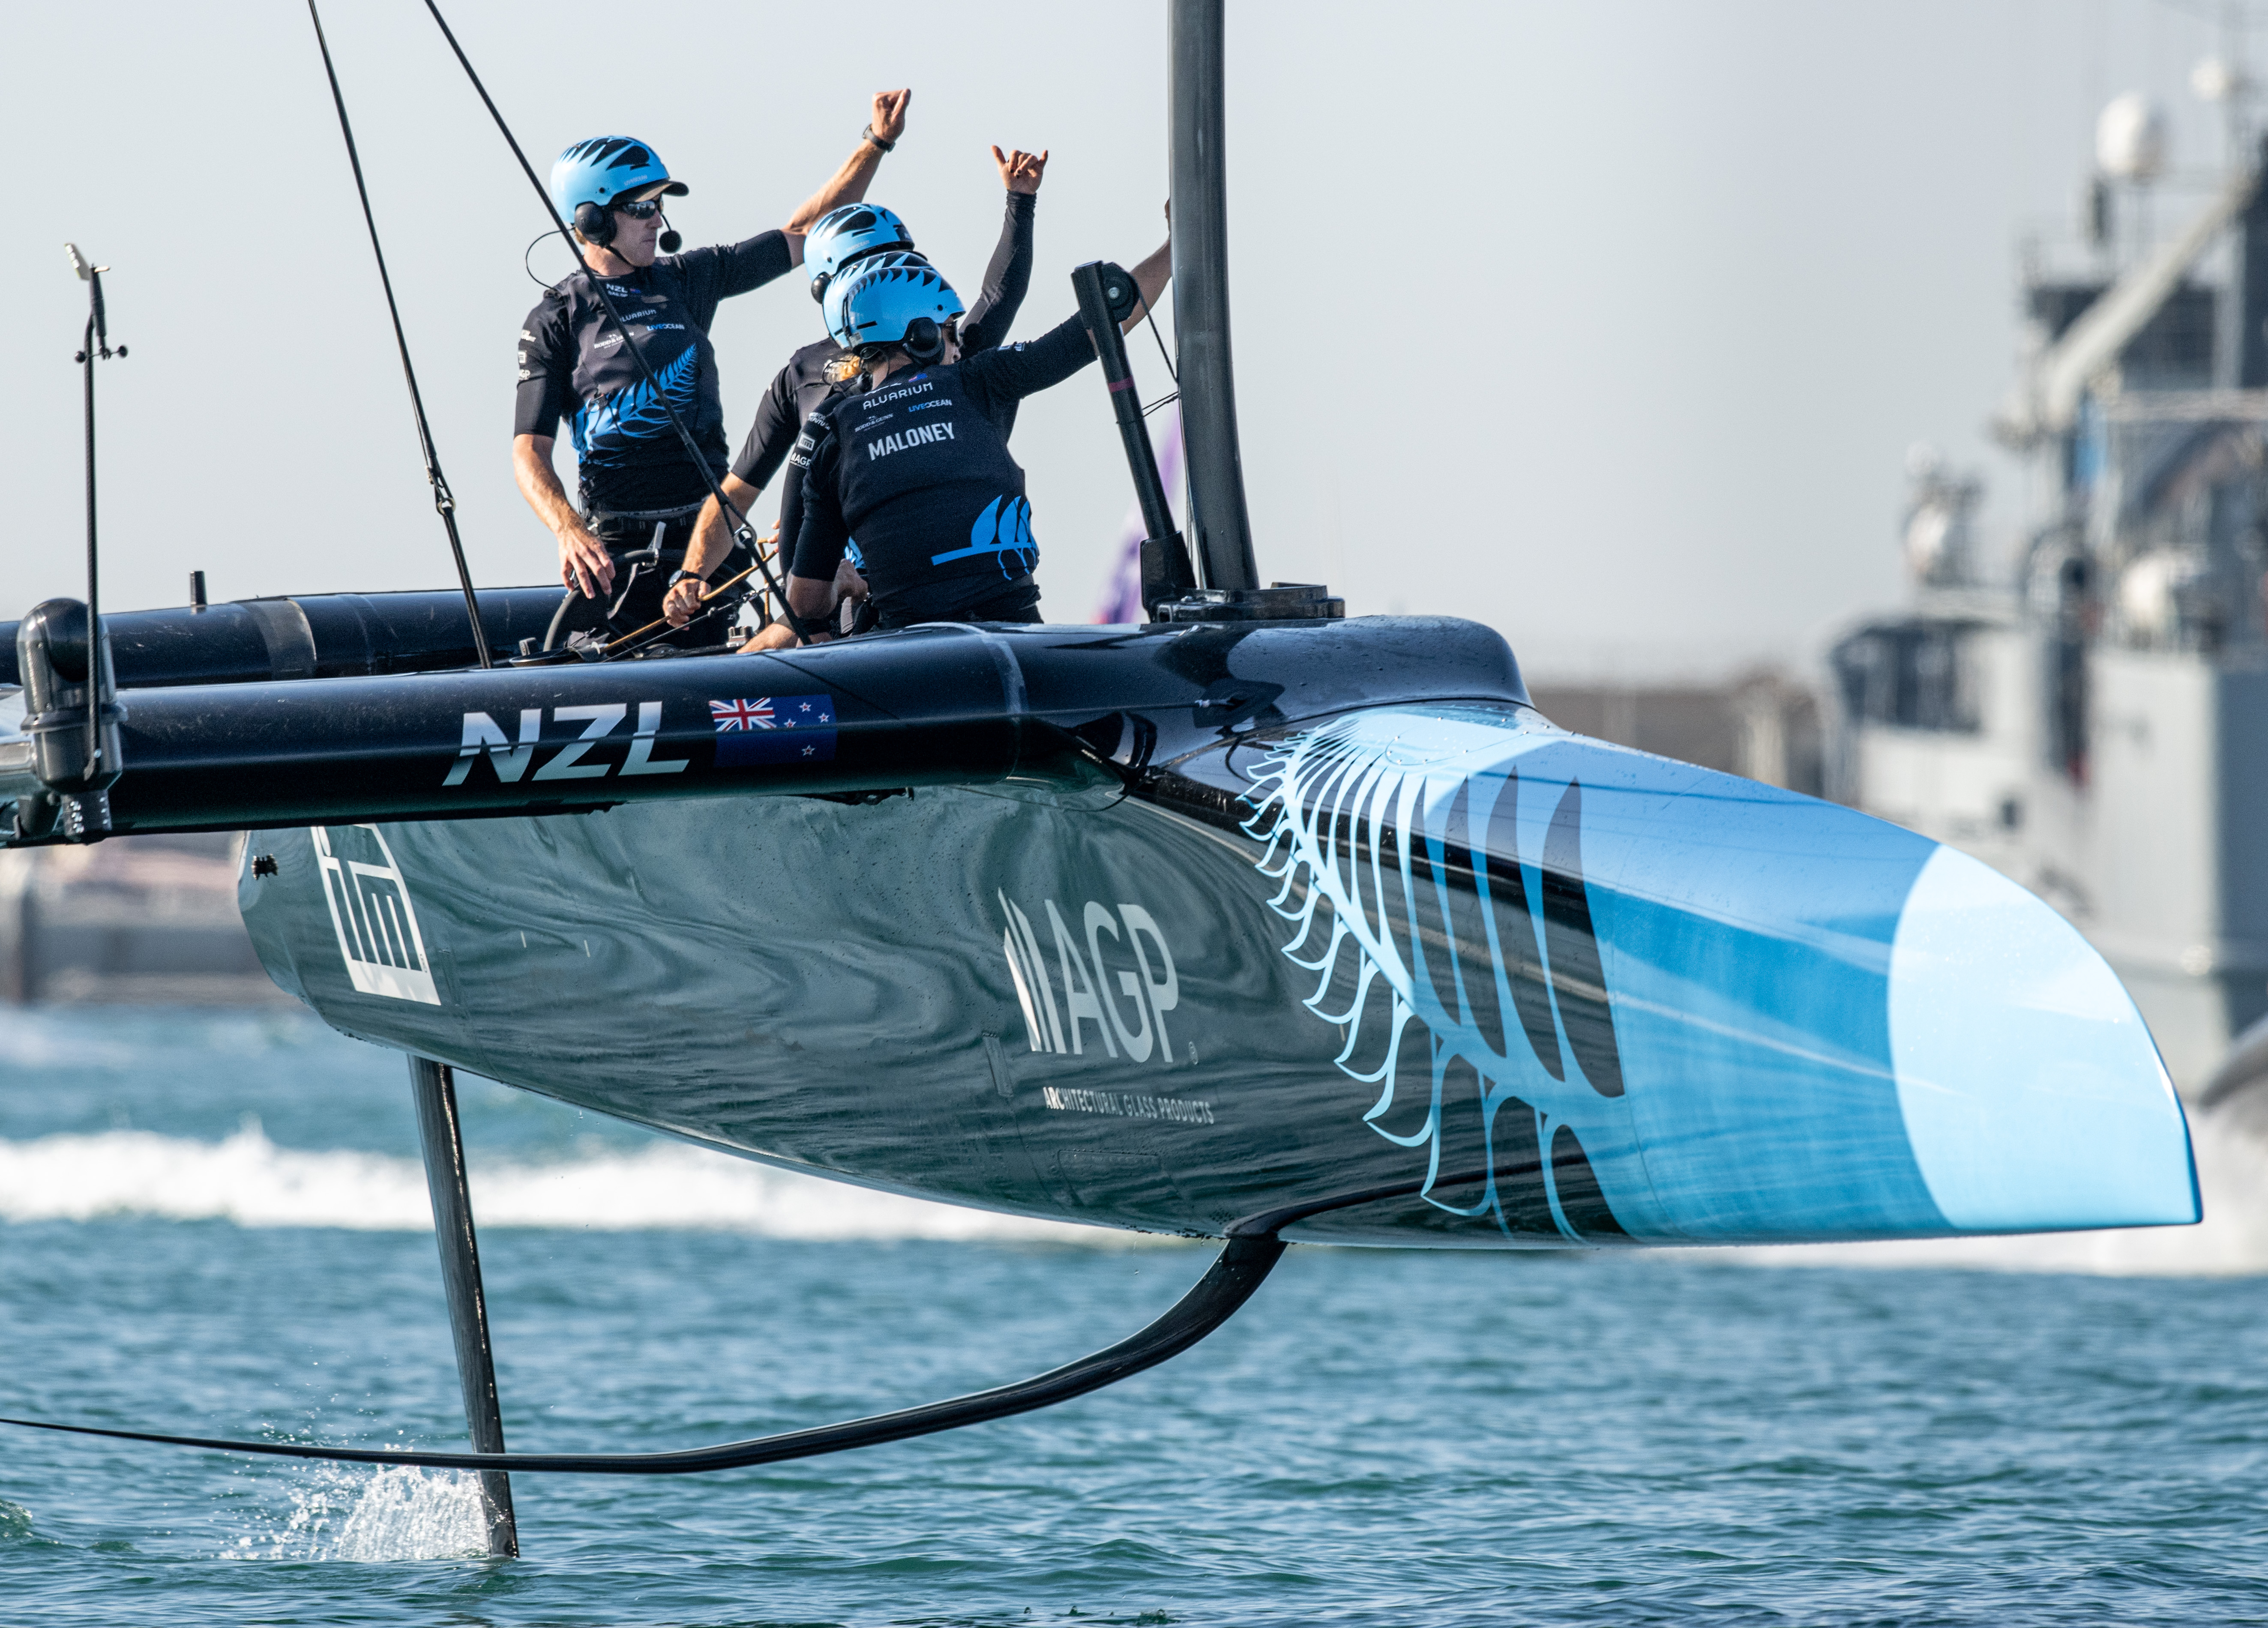 Plain sailing: Behind the scenes on SailGP's communications and audio